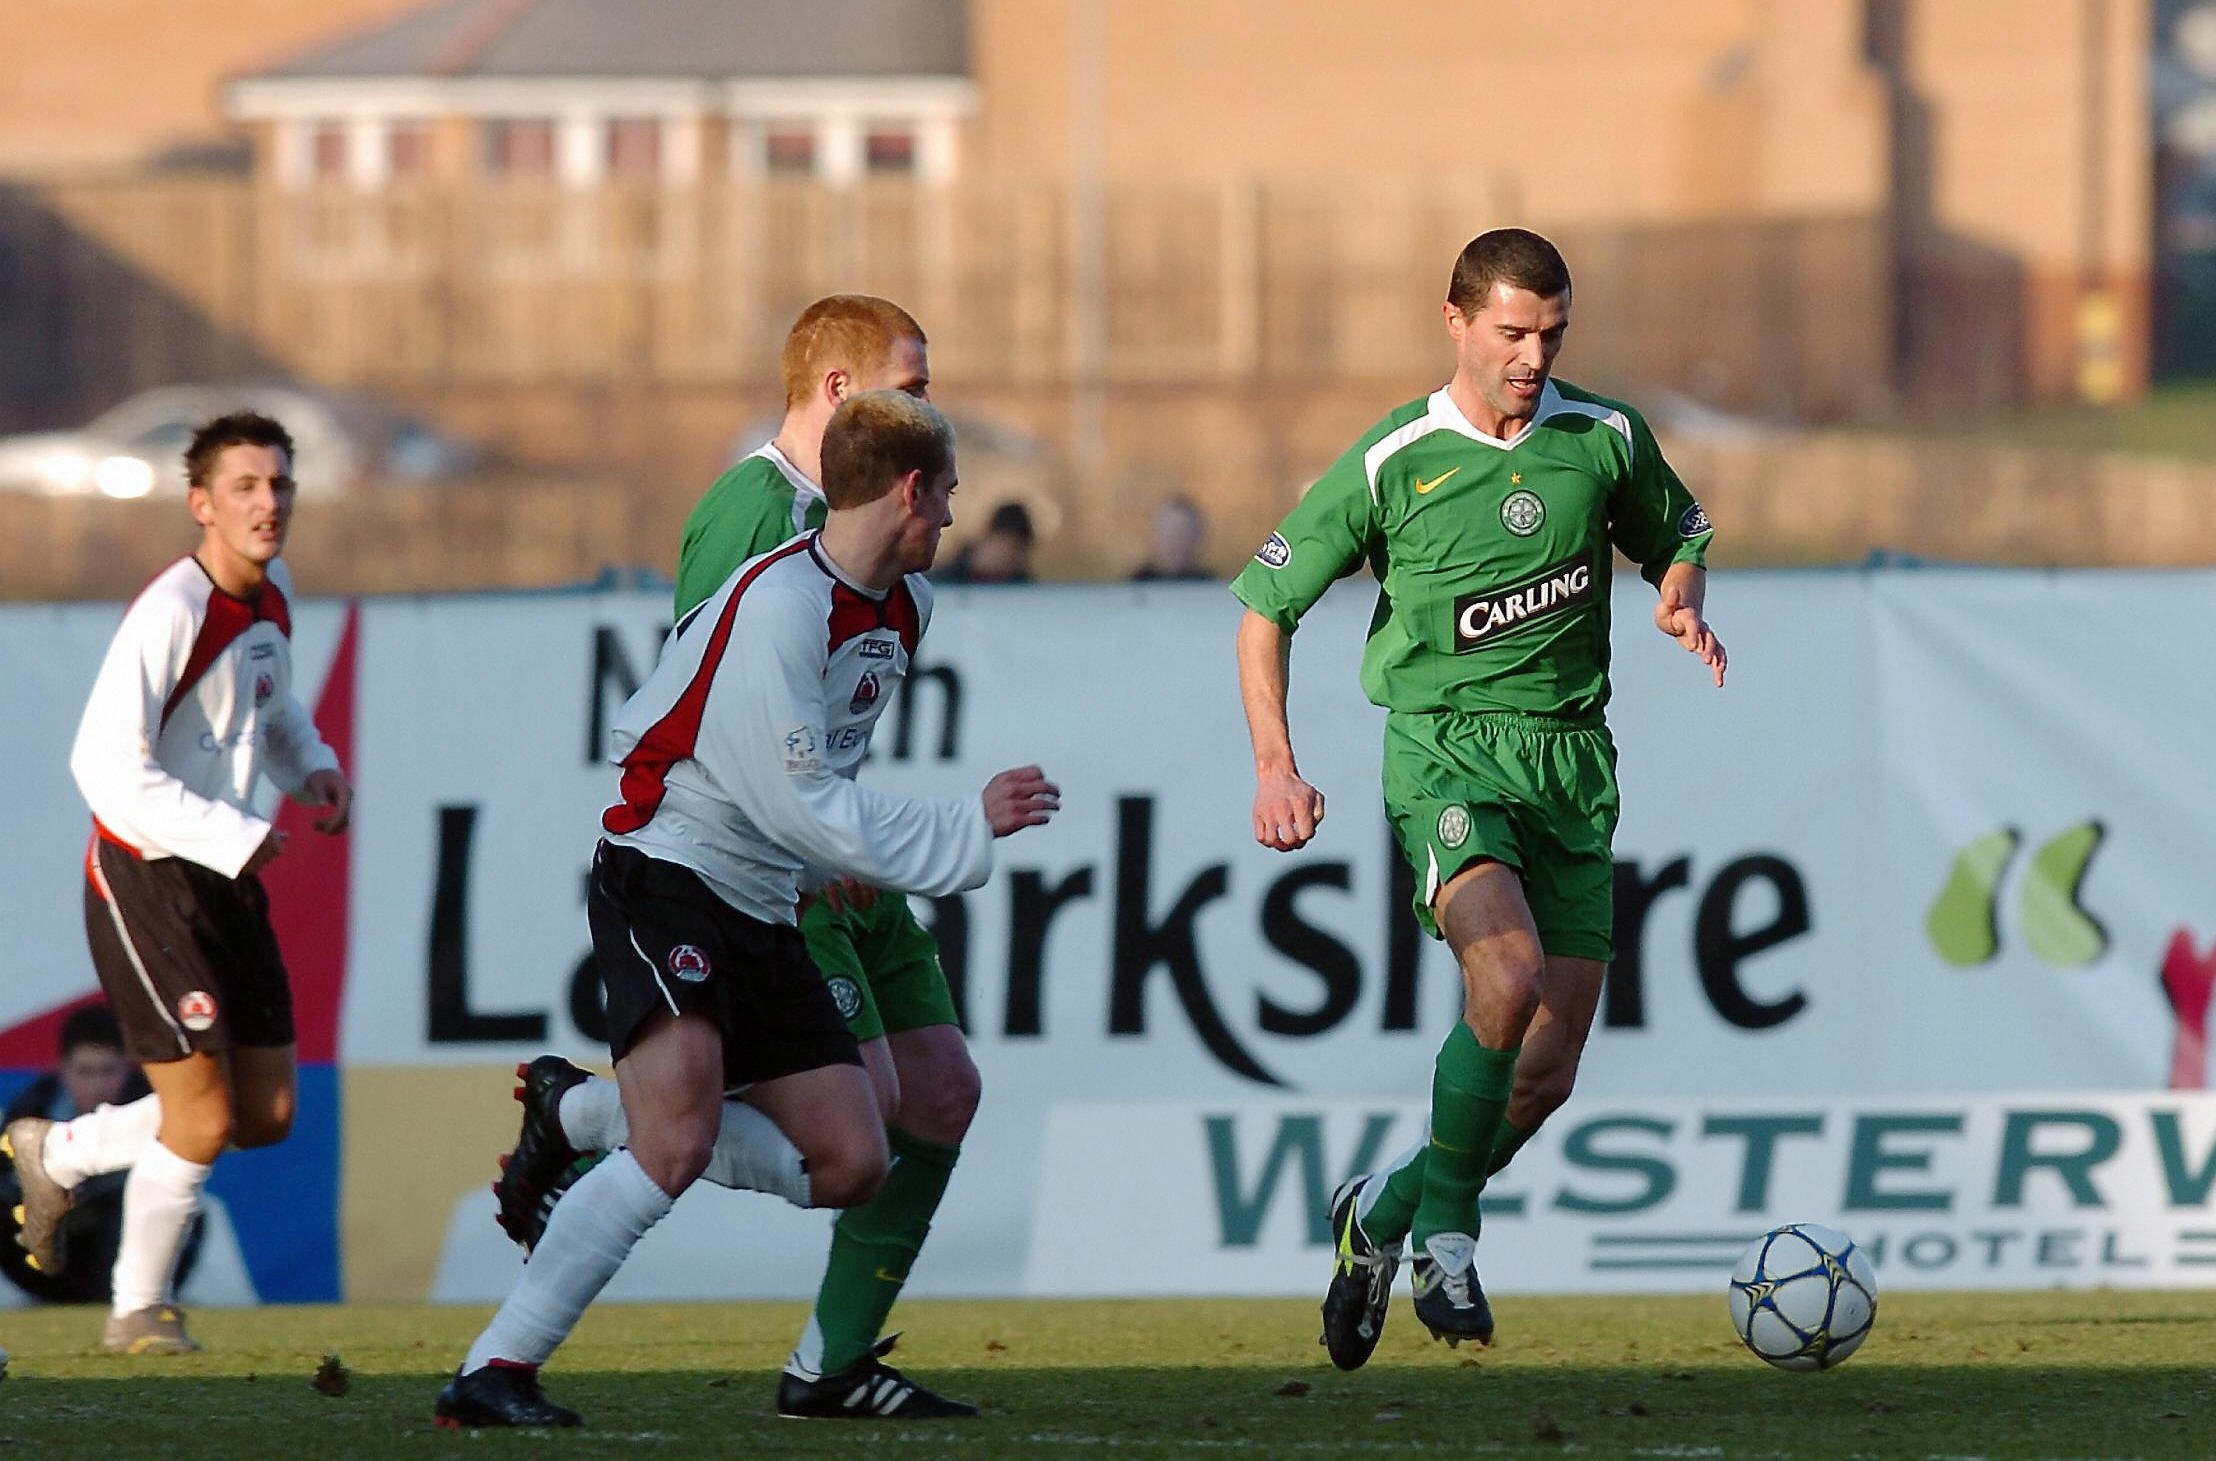 Celtic face Clyde in 2006